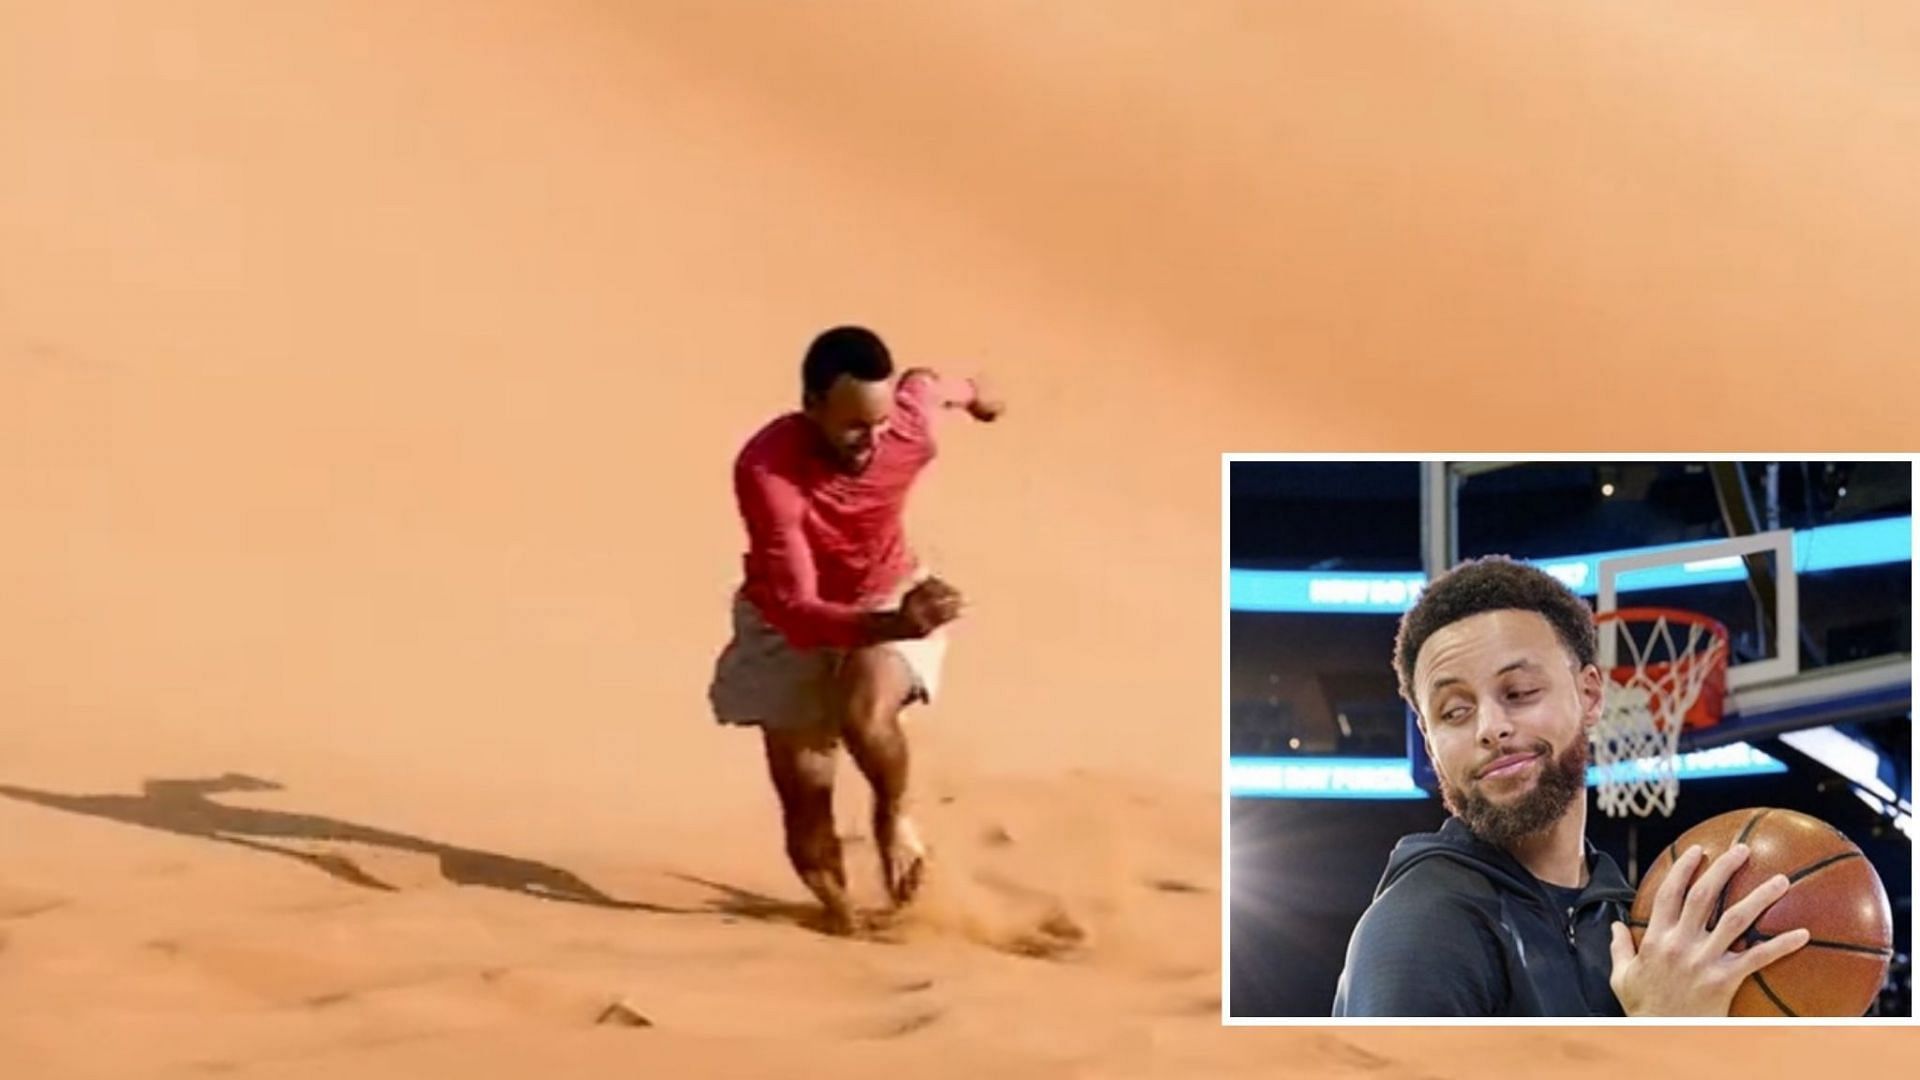 Curry trains on the sands of Dubai in recent video